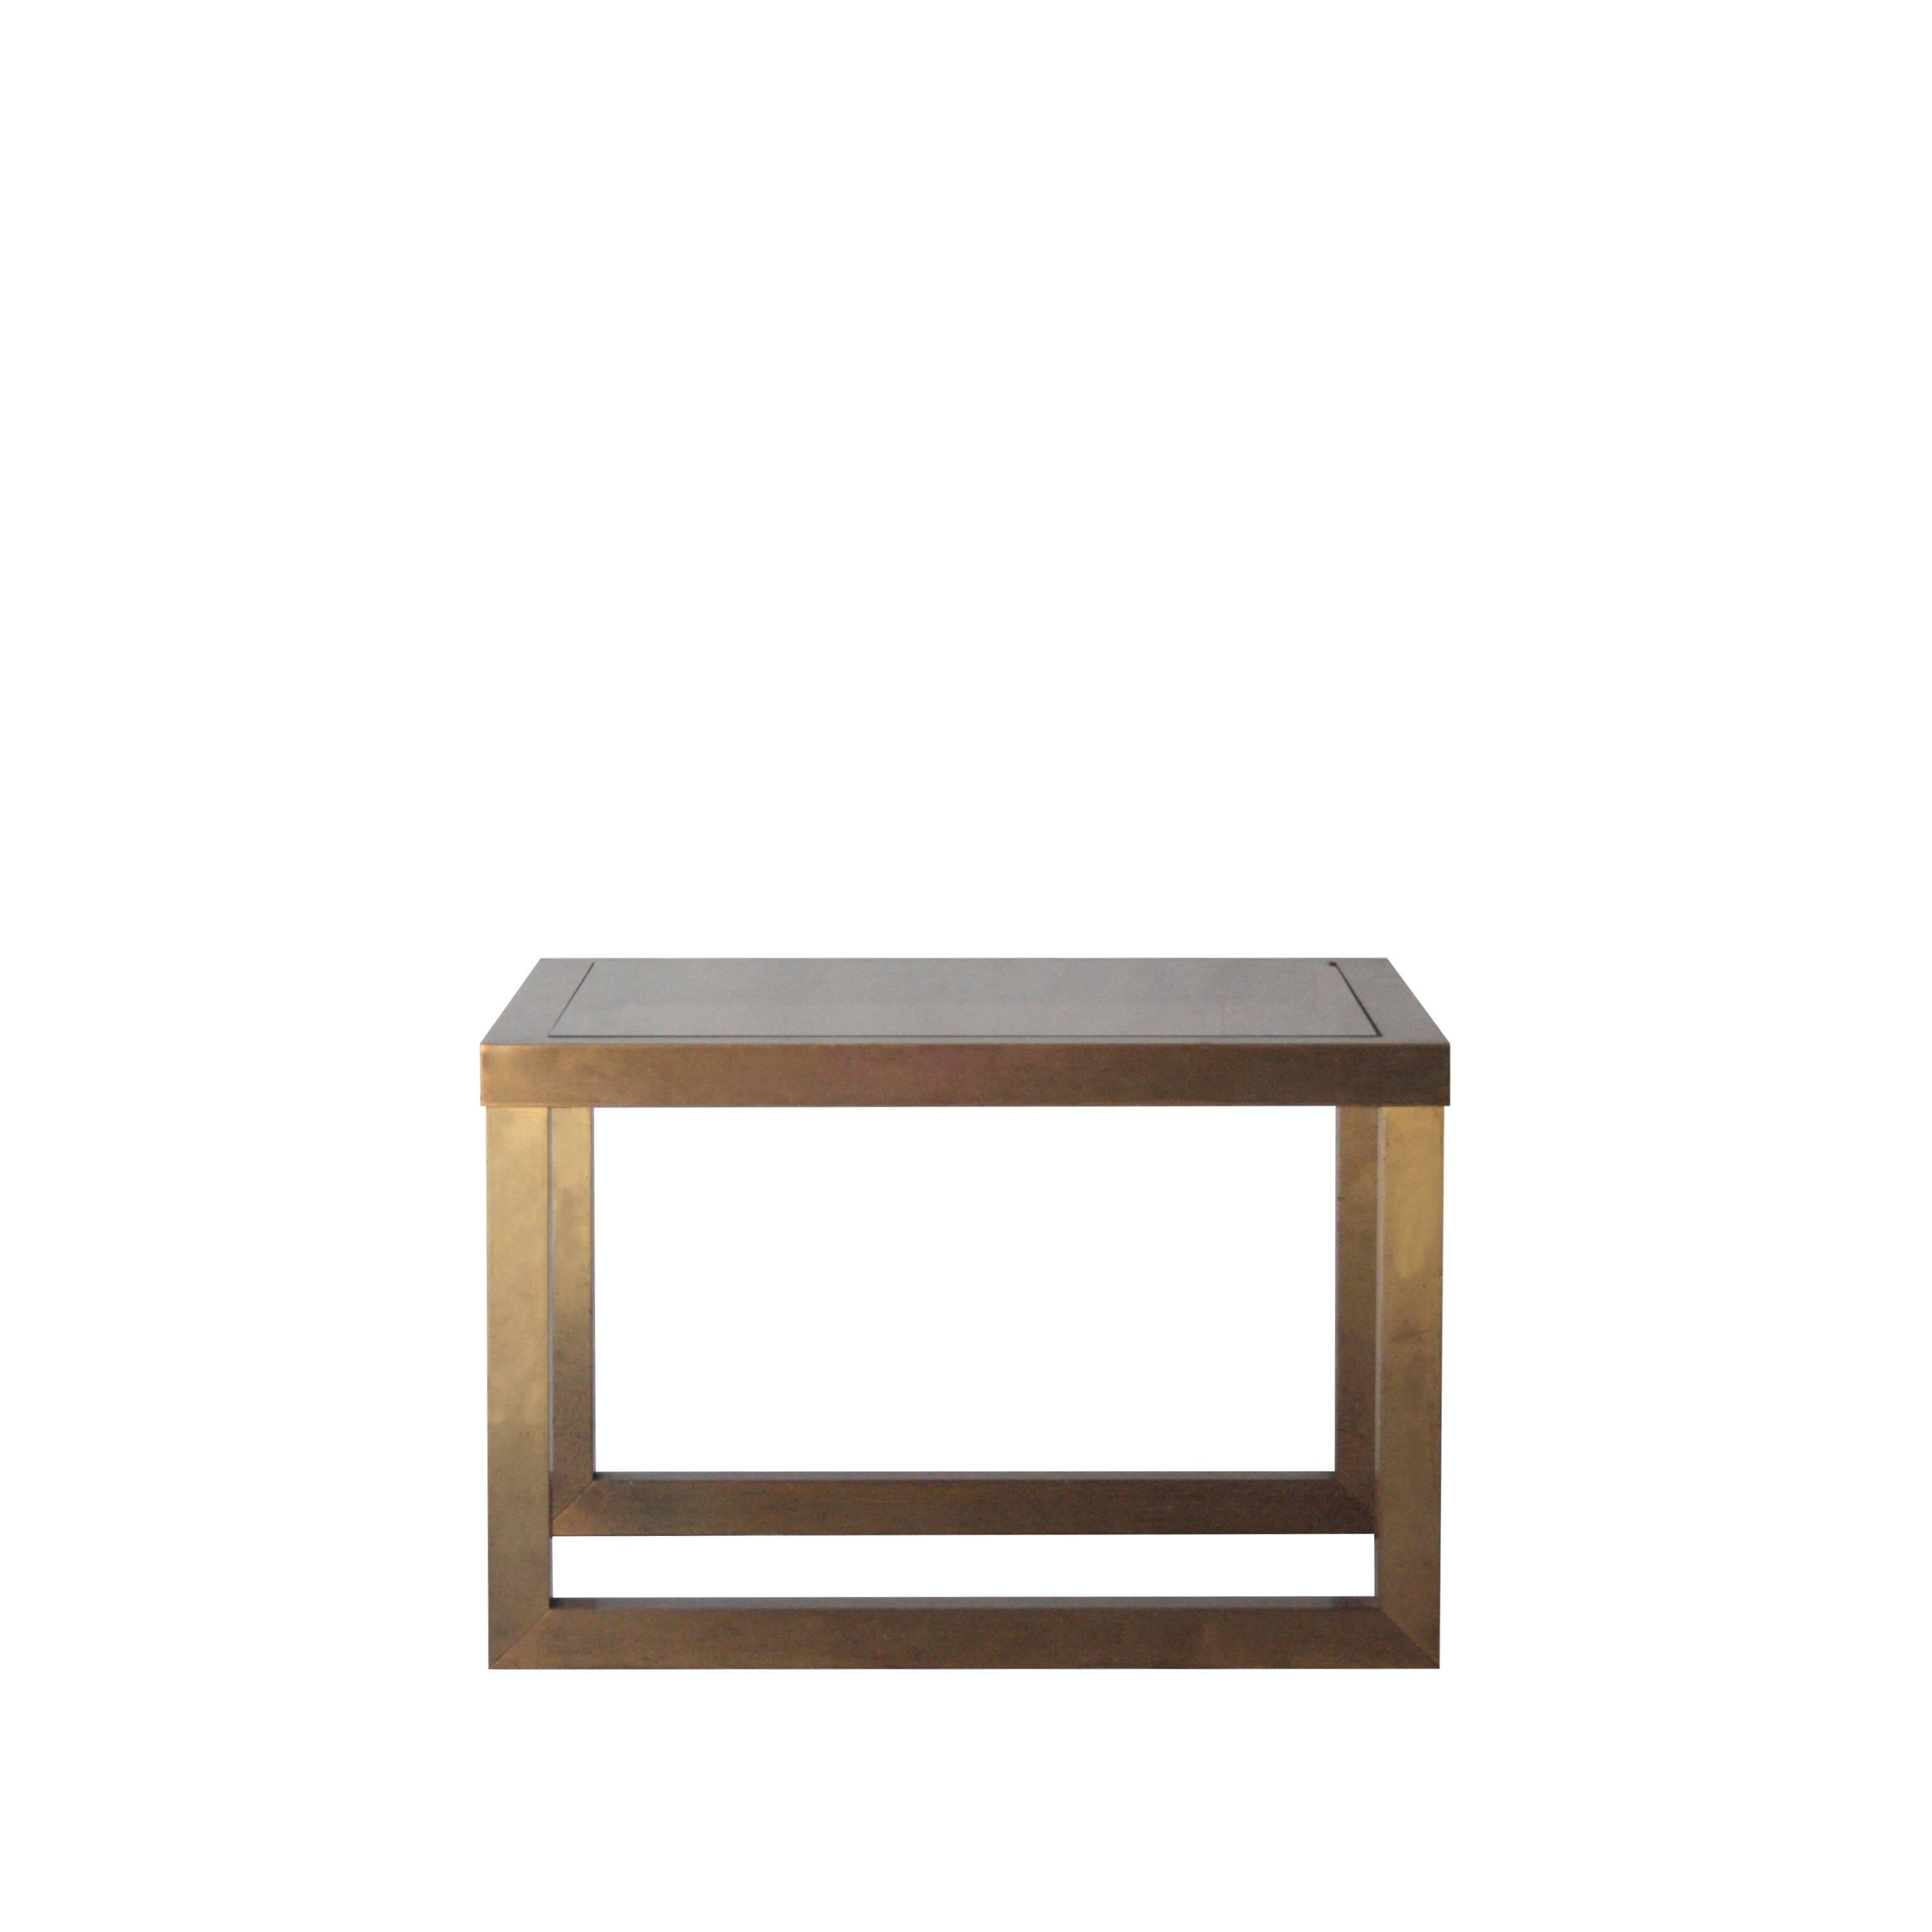 Side table with solid steel structure covered in brass, and smoked glass top.